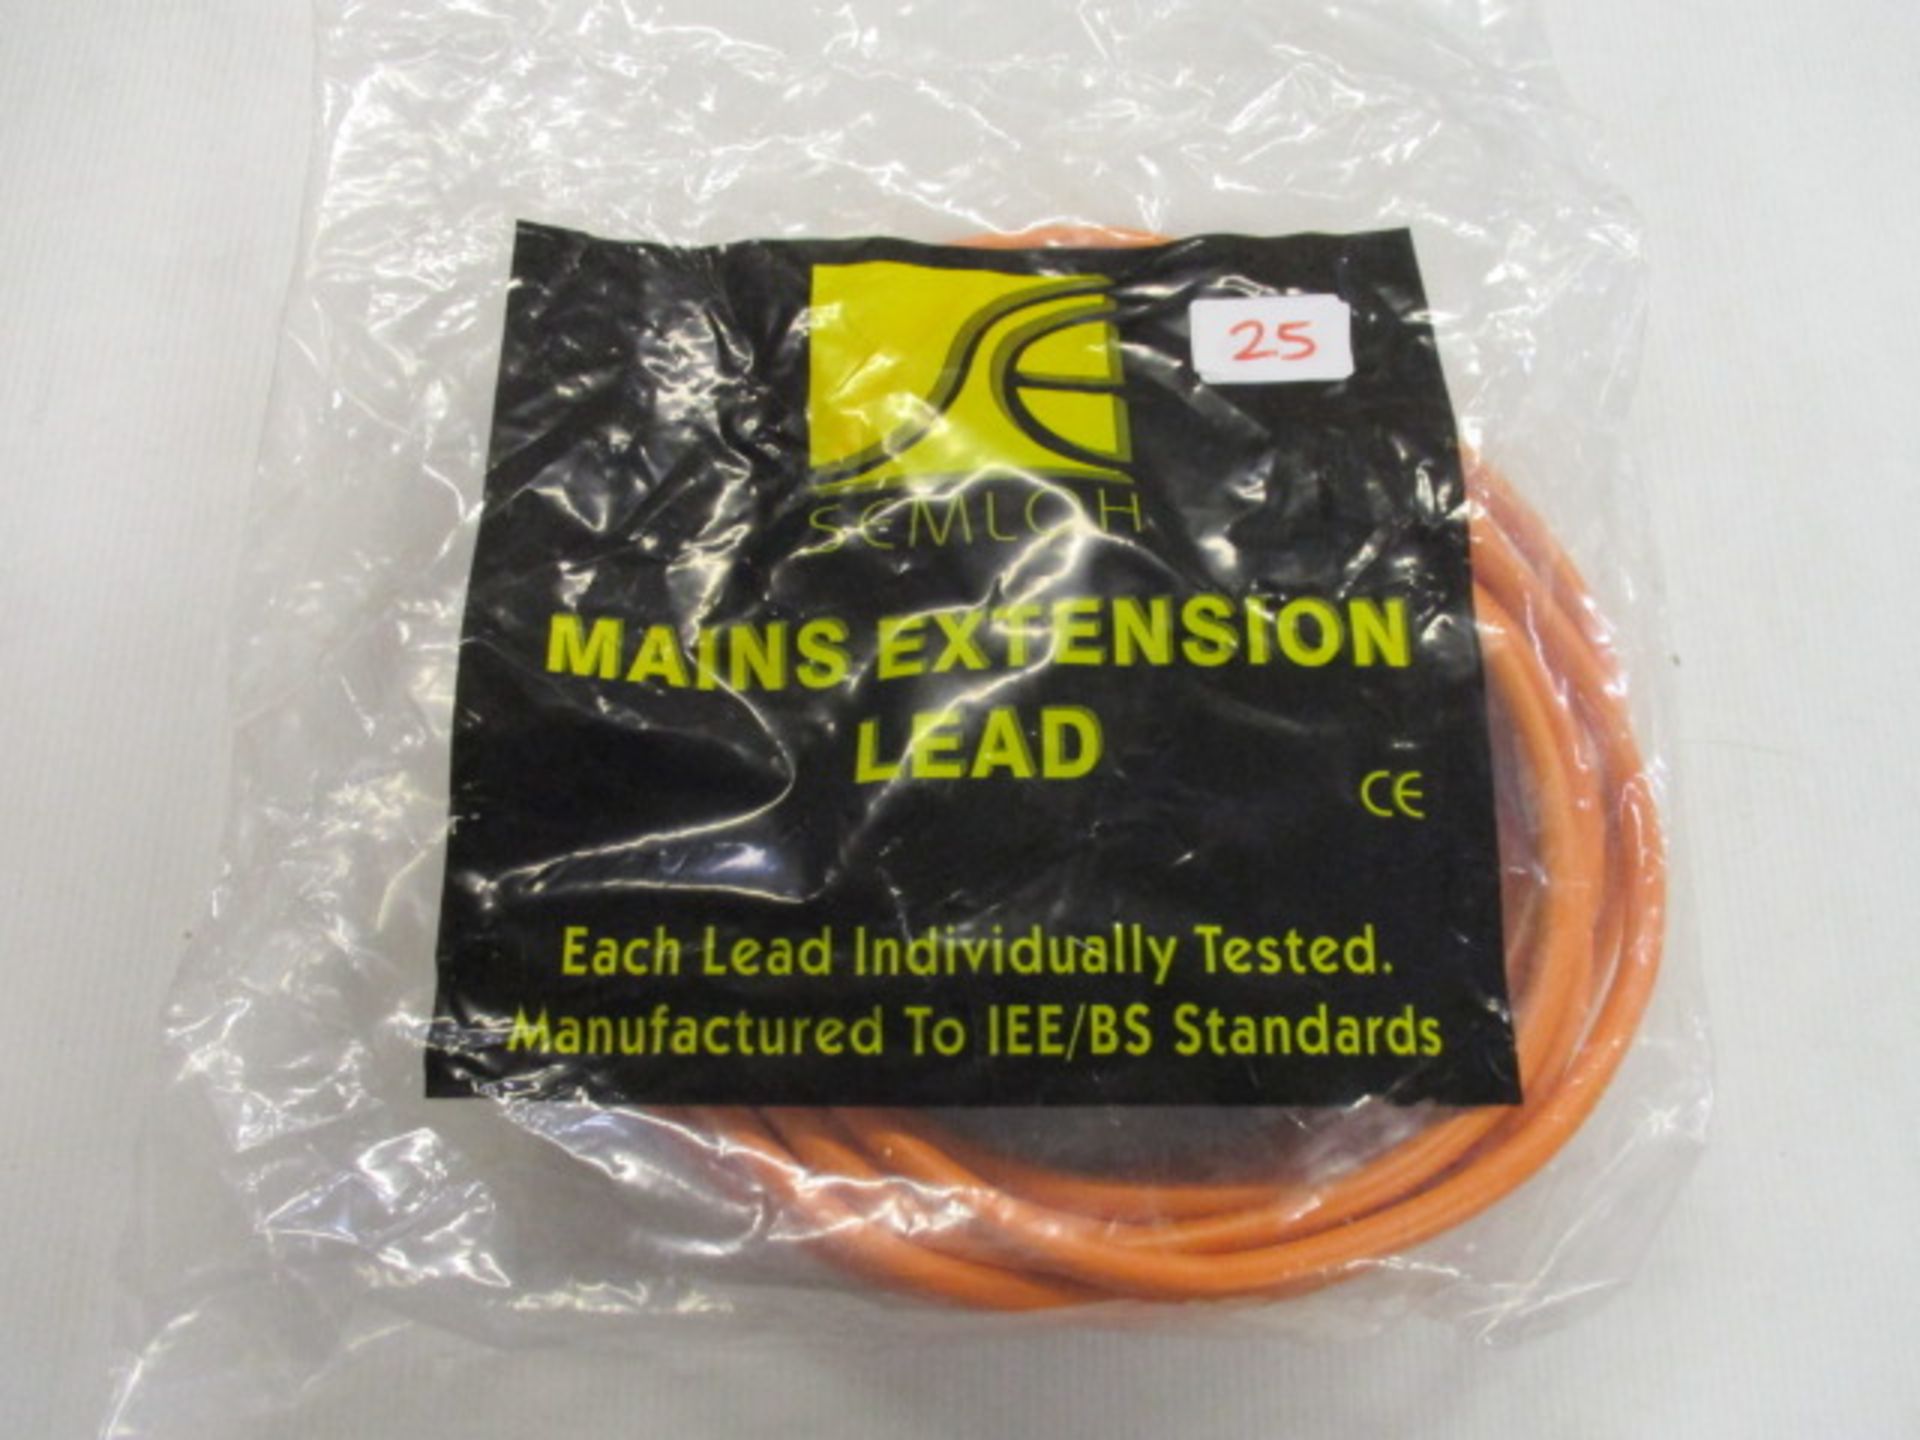 Semloh 10m mains extention leas new unopened